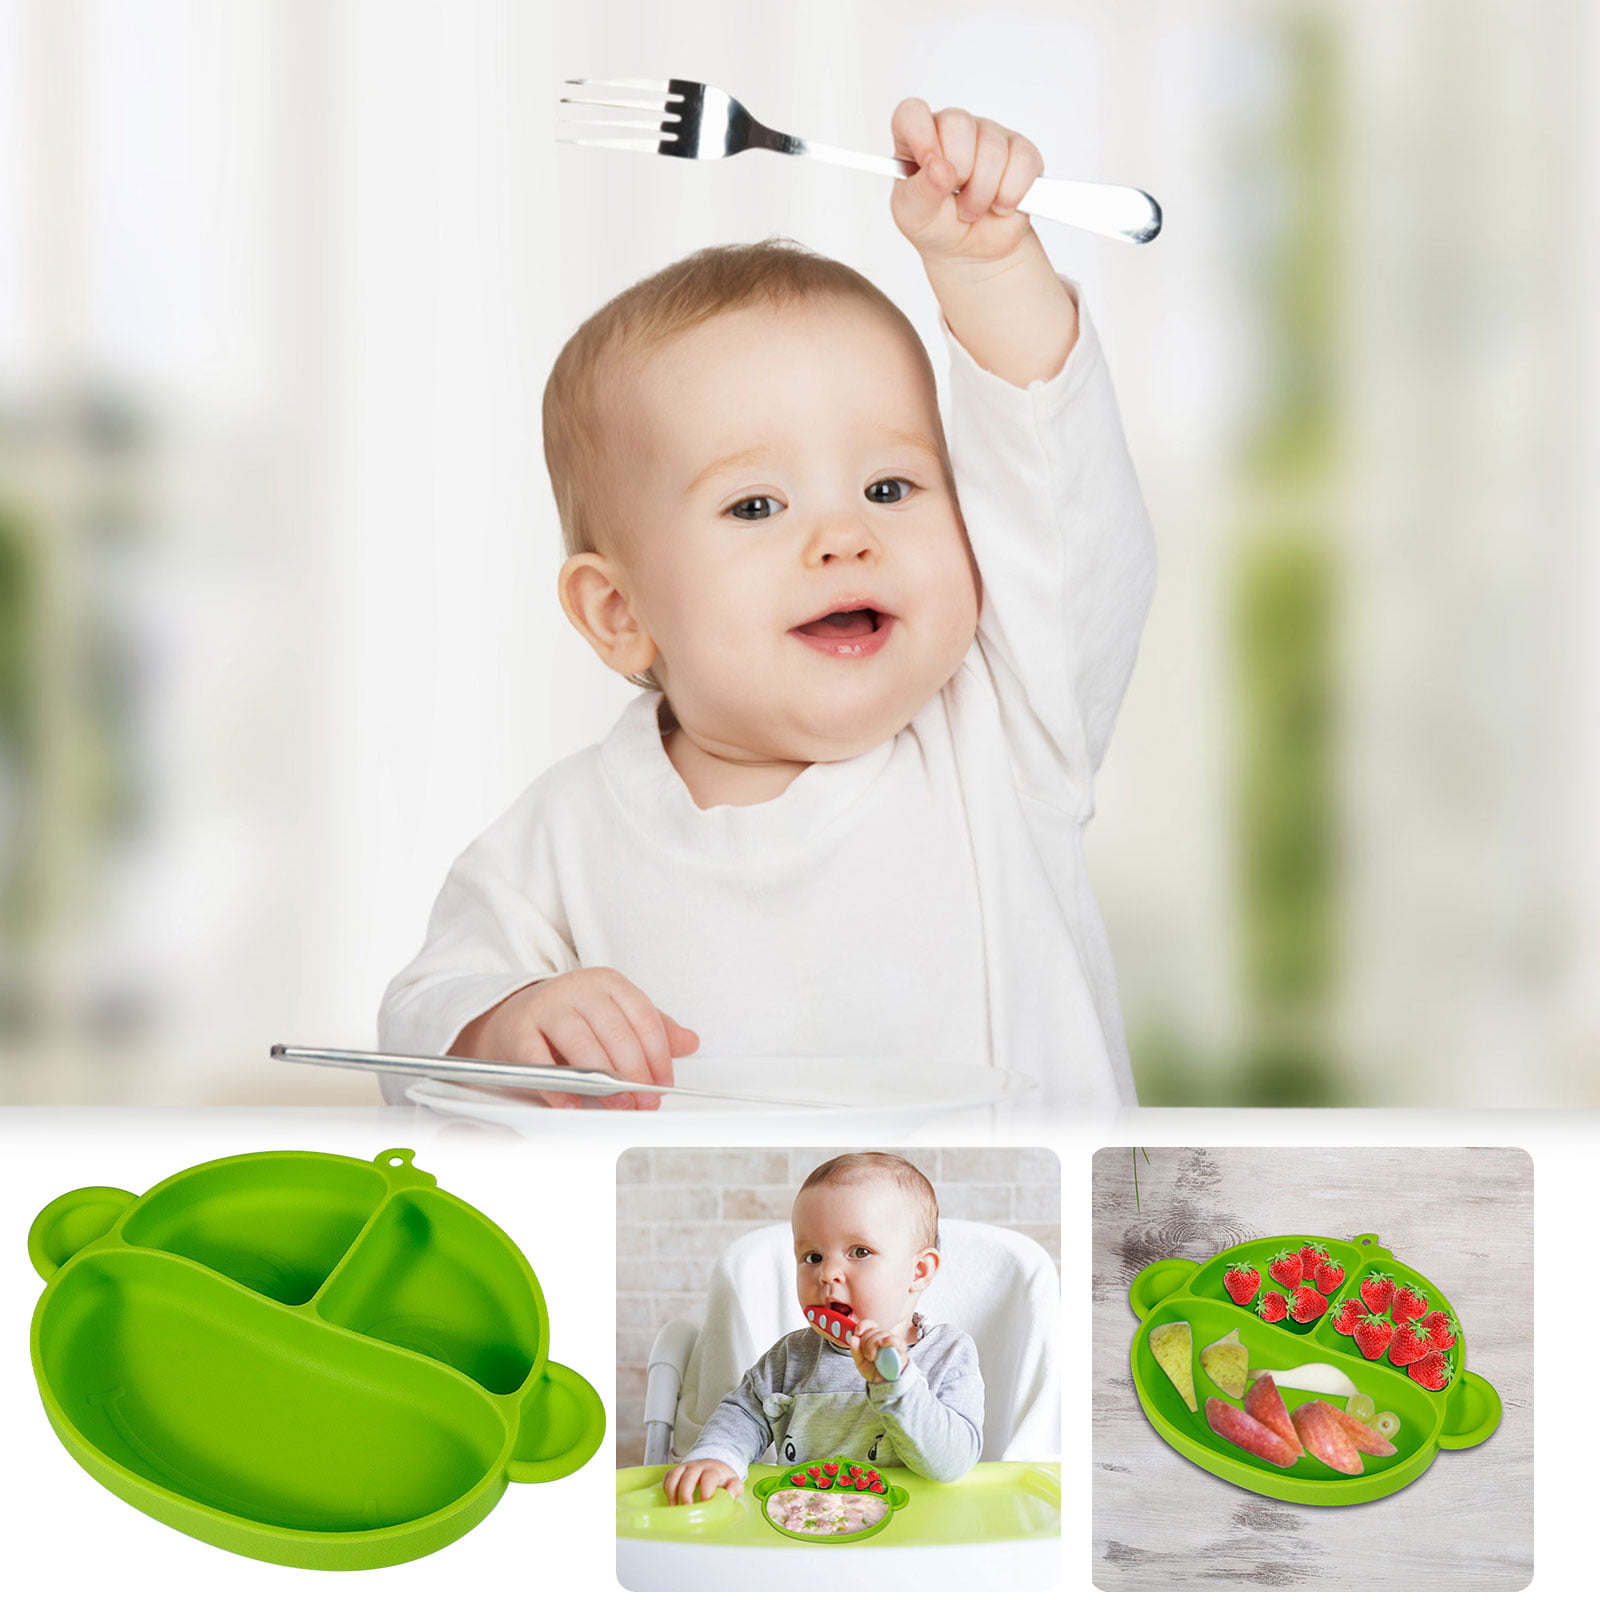 WEESPROUT 100% Silicone Divided Plates for Toddlers